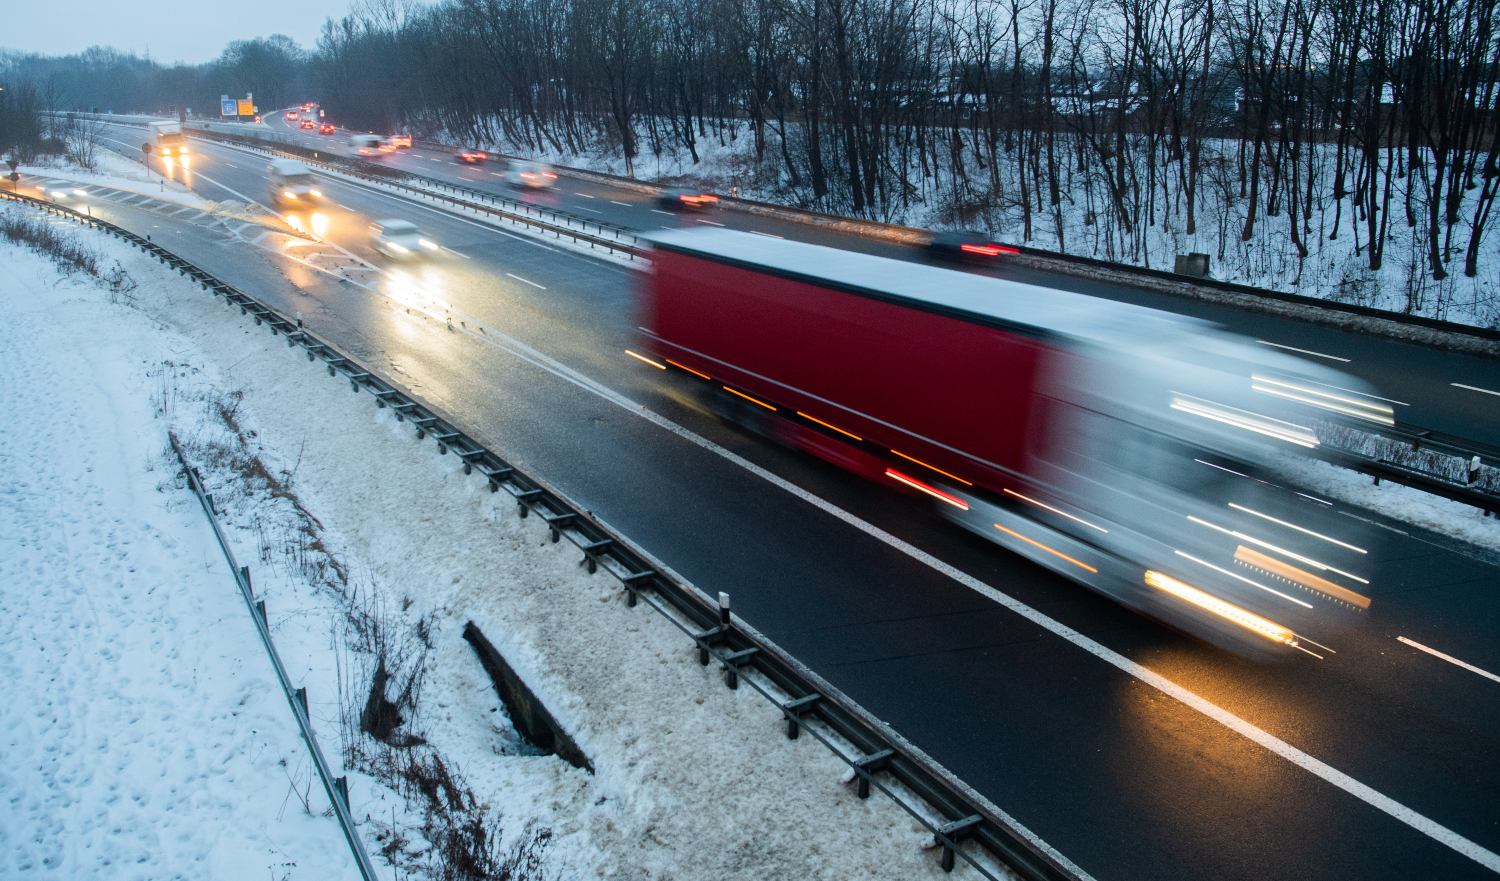 Icy weather causes accidents in Germany as cold spell set to end